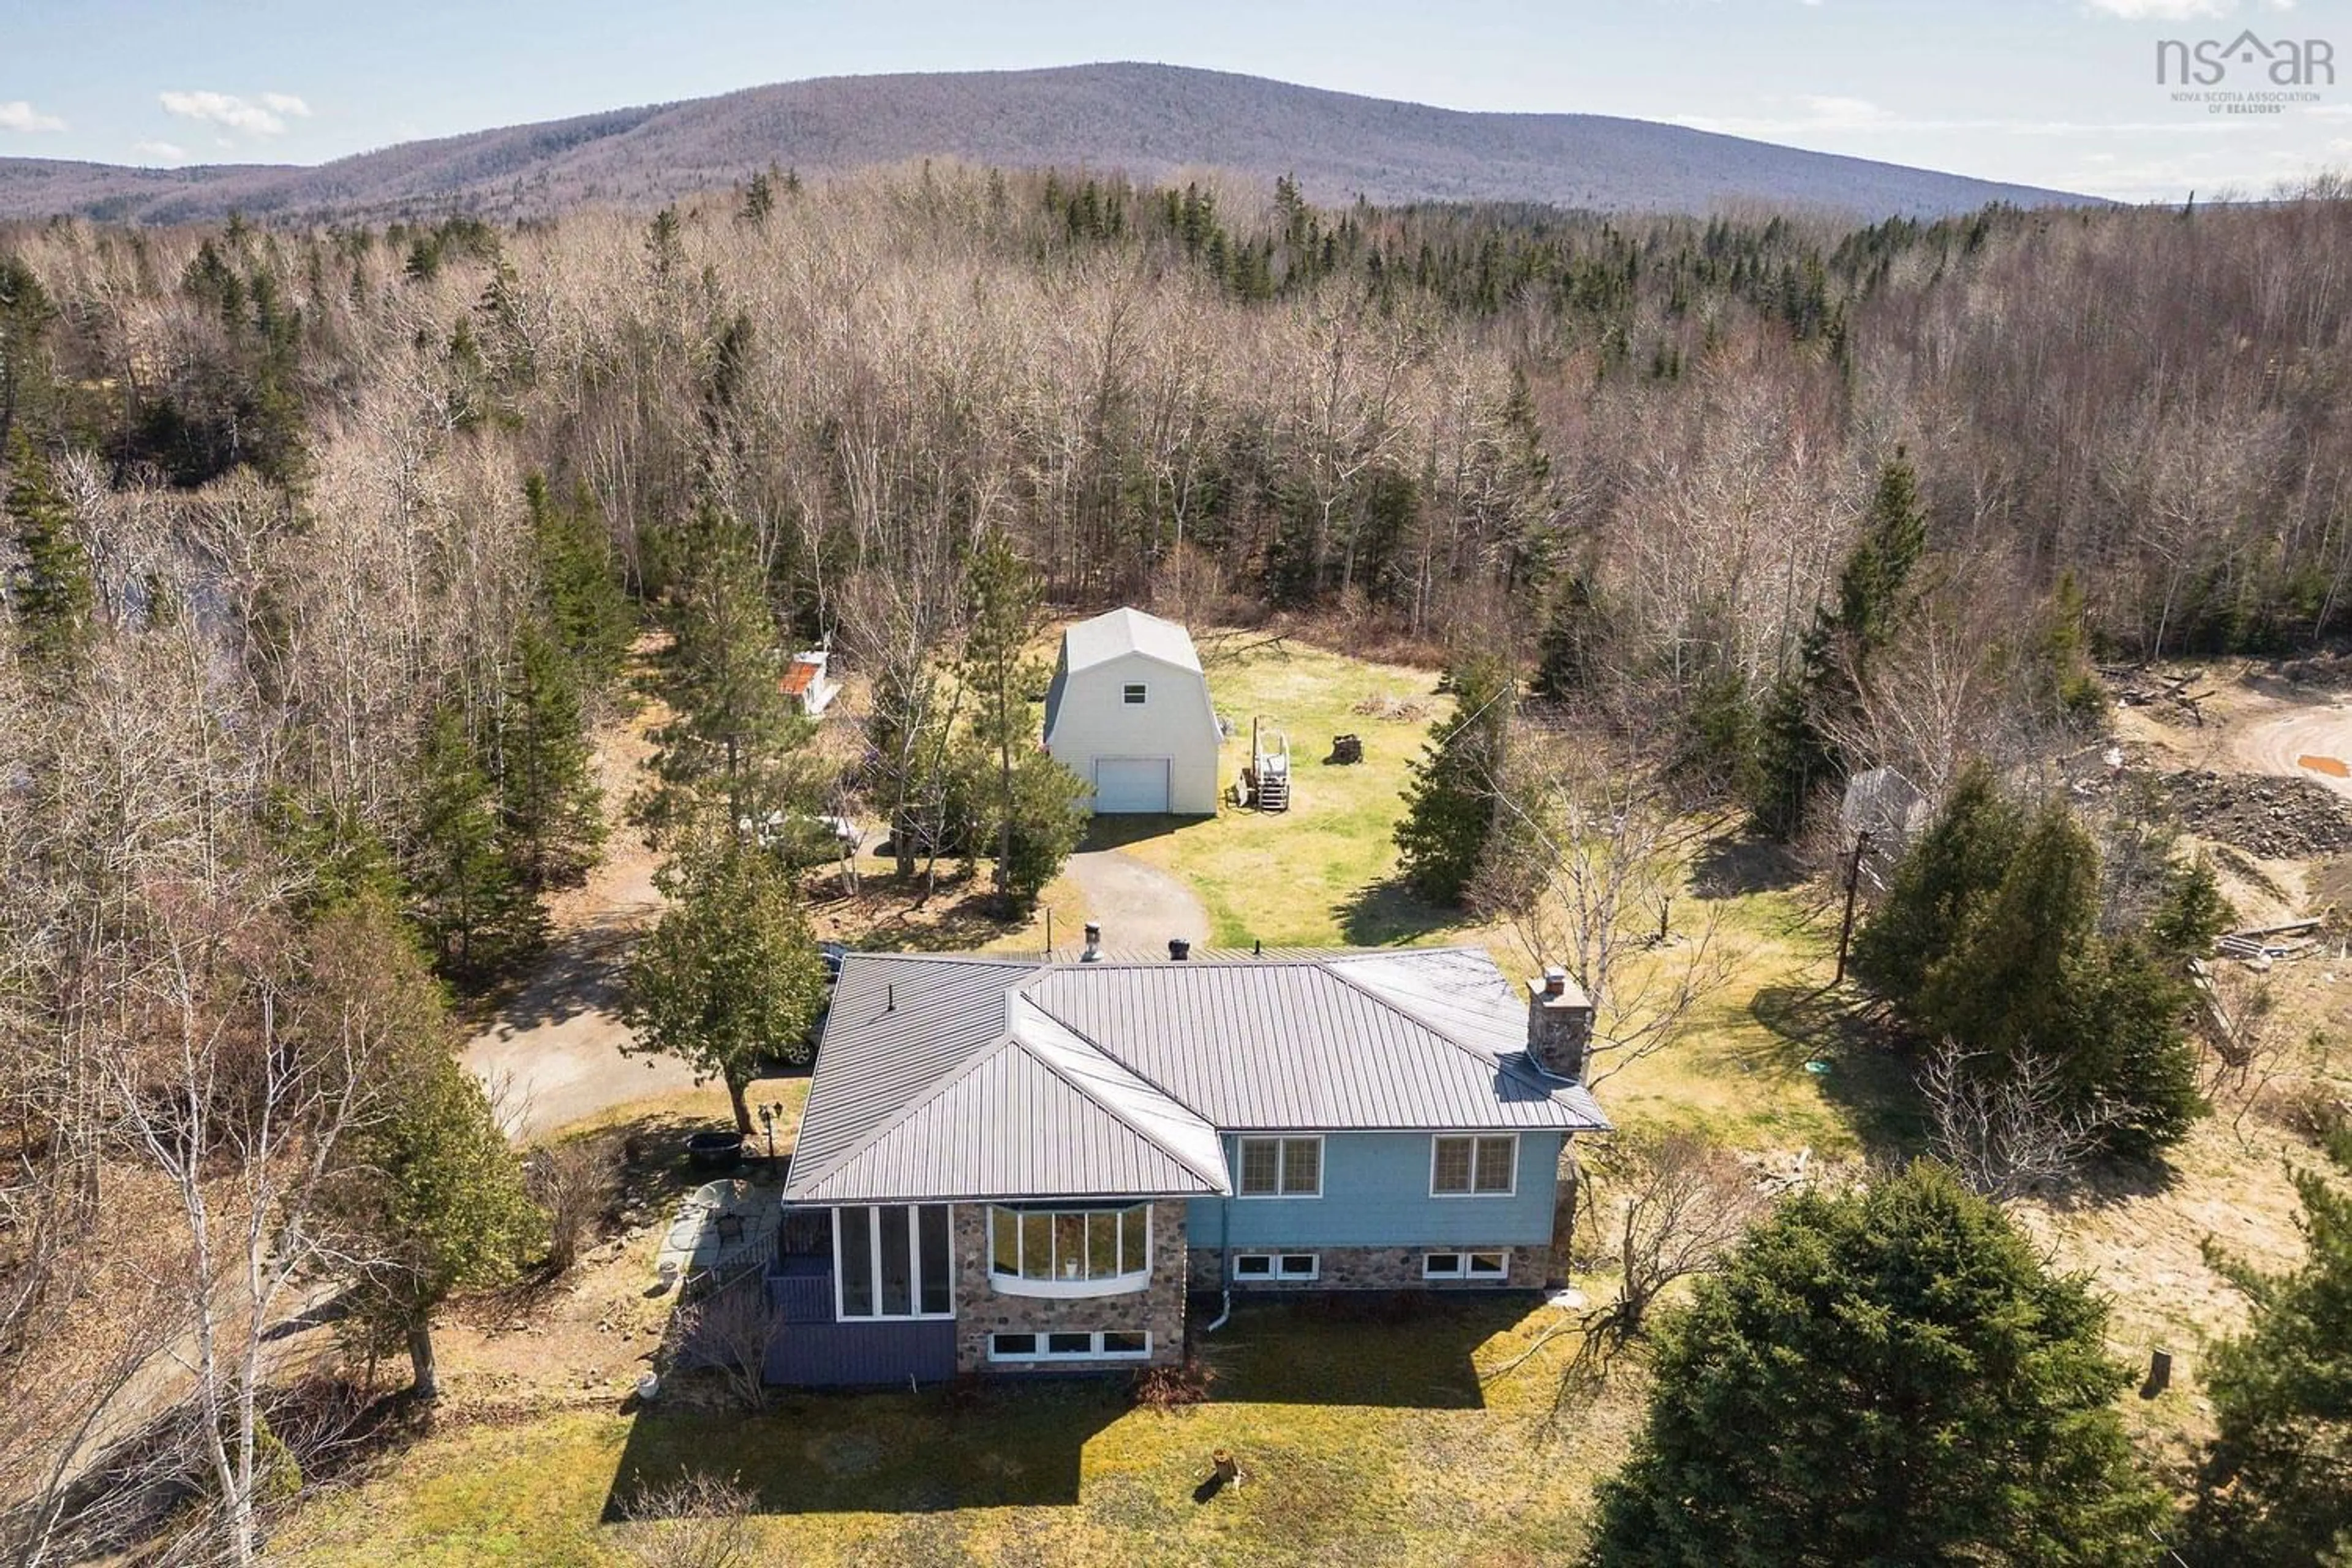 Cottage for Mill Road Rd #47, Margaree Forks Nova Scotia B0E 2A0